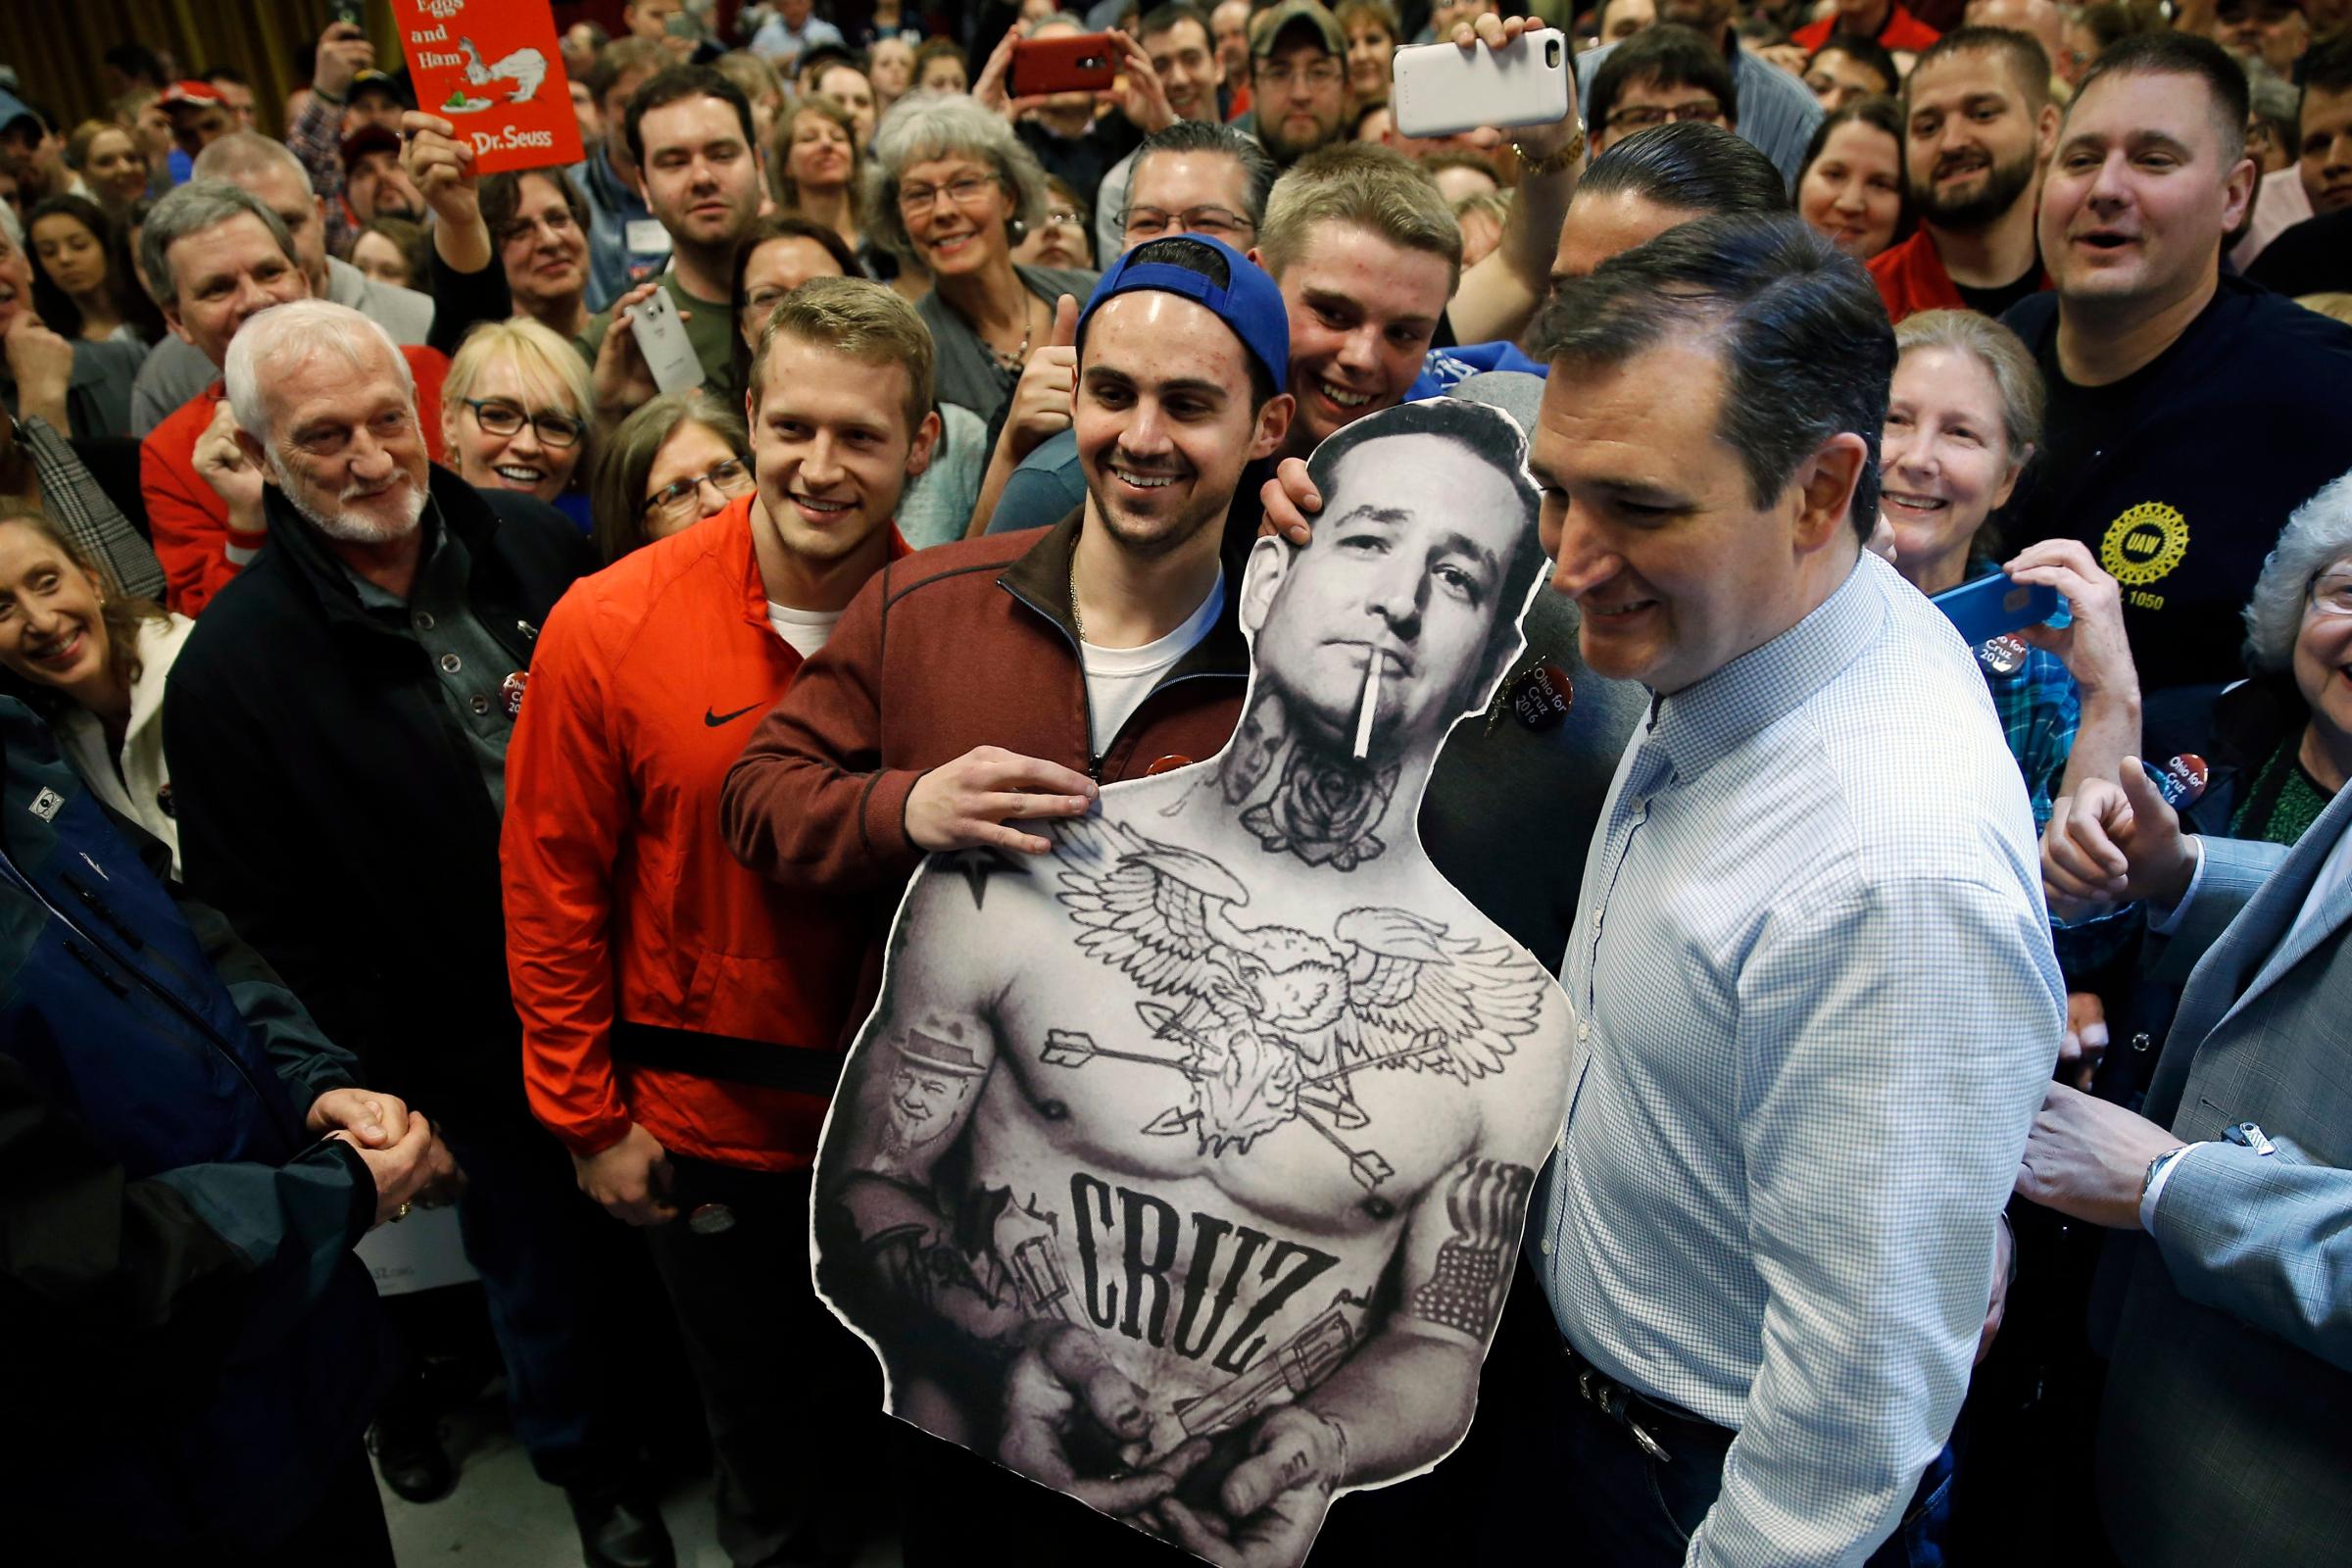 Republican presidential candidate, Texas Sen. Ted Cruz poses for photographs with a cut-out during a campaign stop on March 13 in Columbus, Ohio.